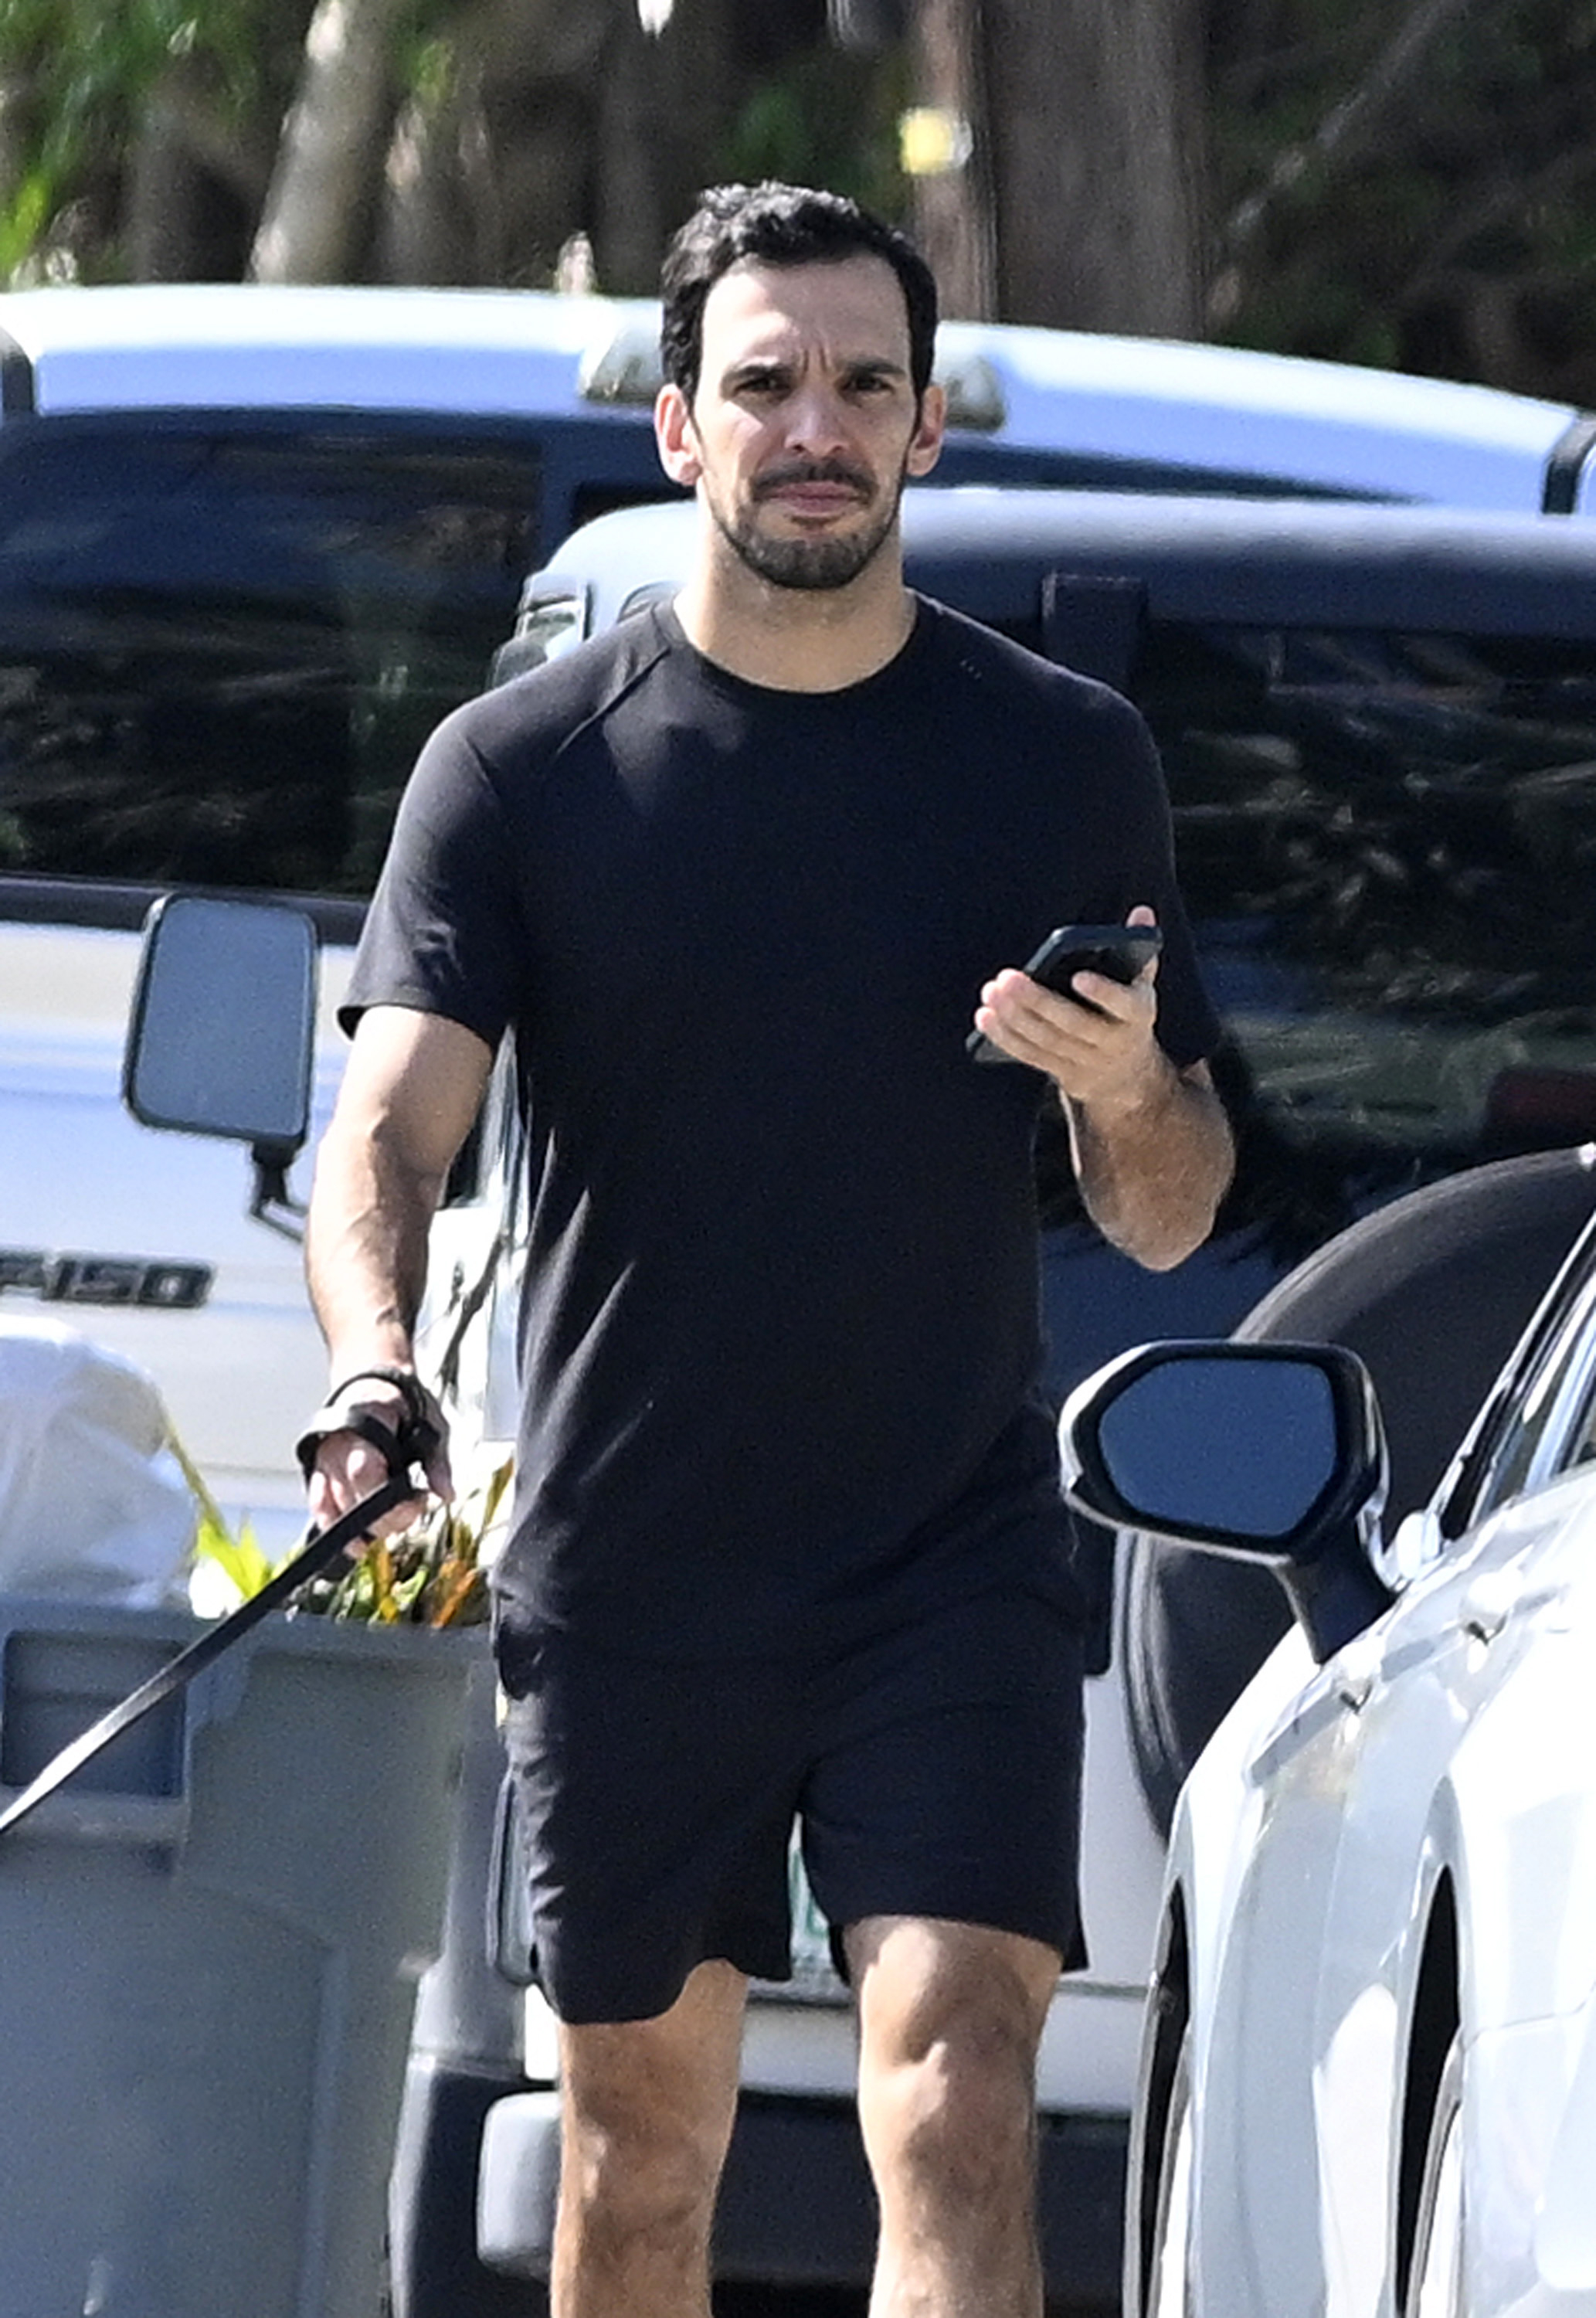 Joaquim in casual athleticwear holding a phone and walking by a car